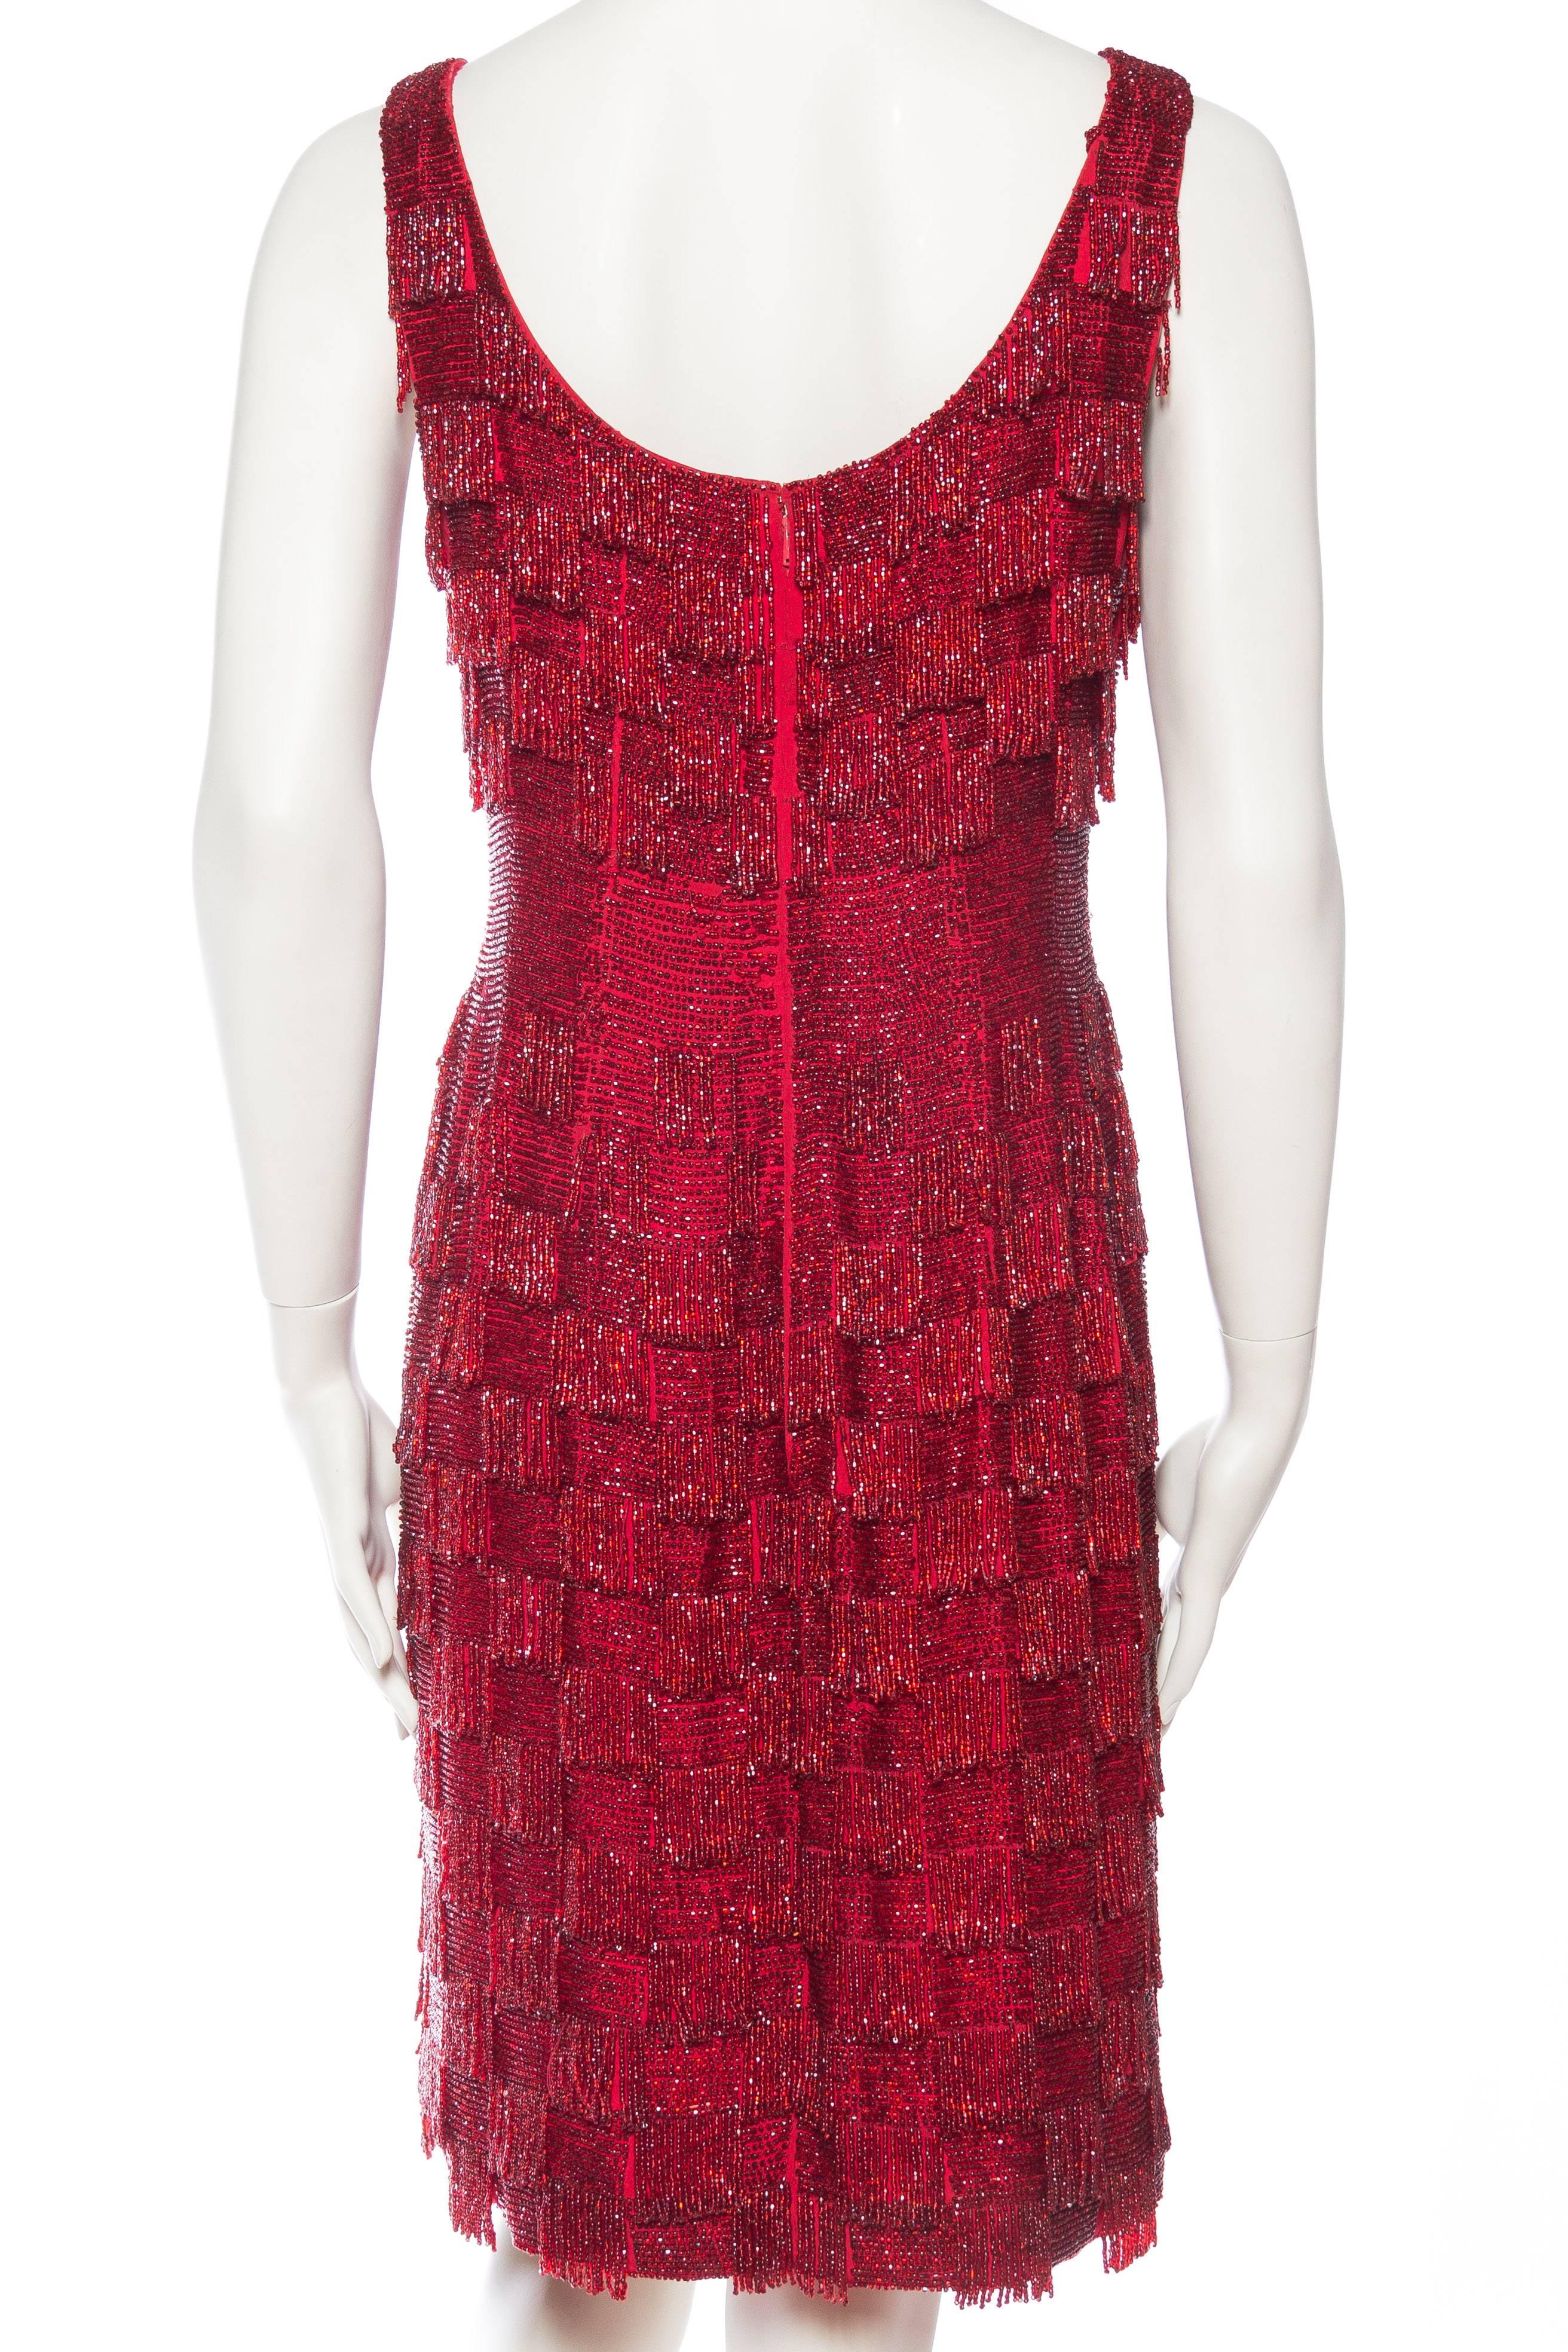 1950s Solid Beaded Fringe Dress Attributed to Jean Dessés 2